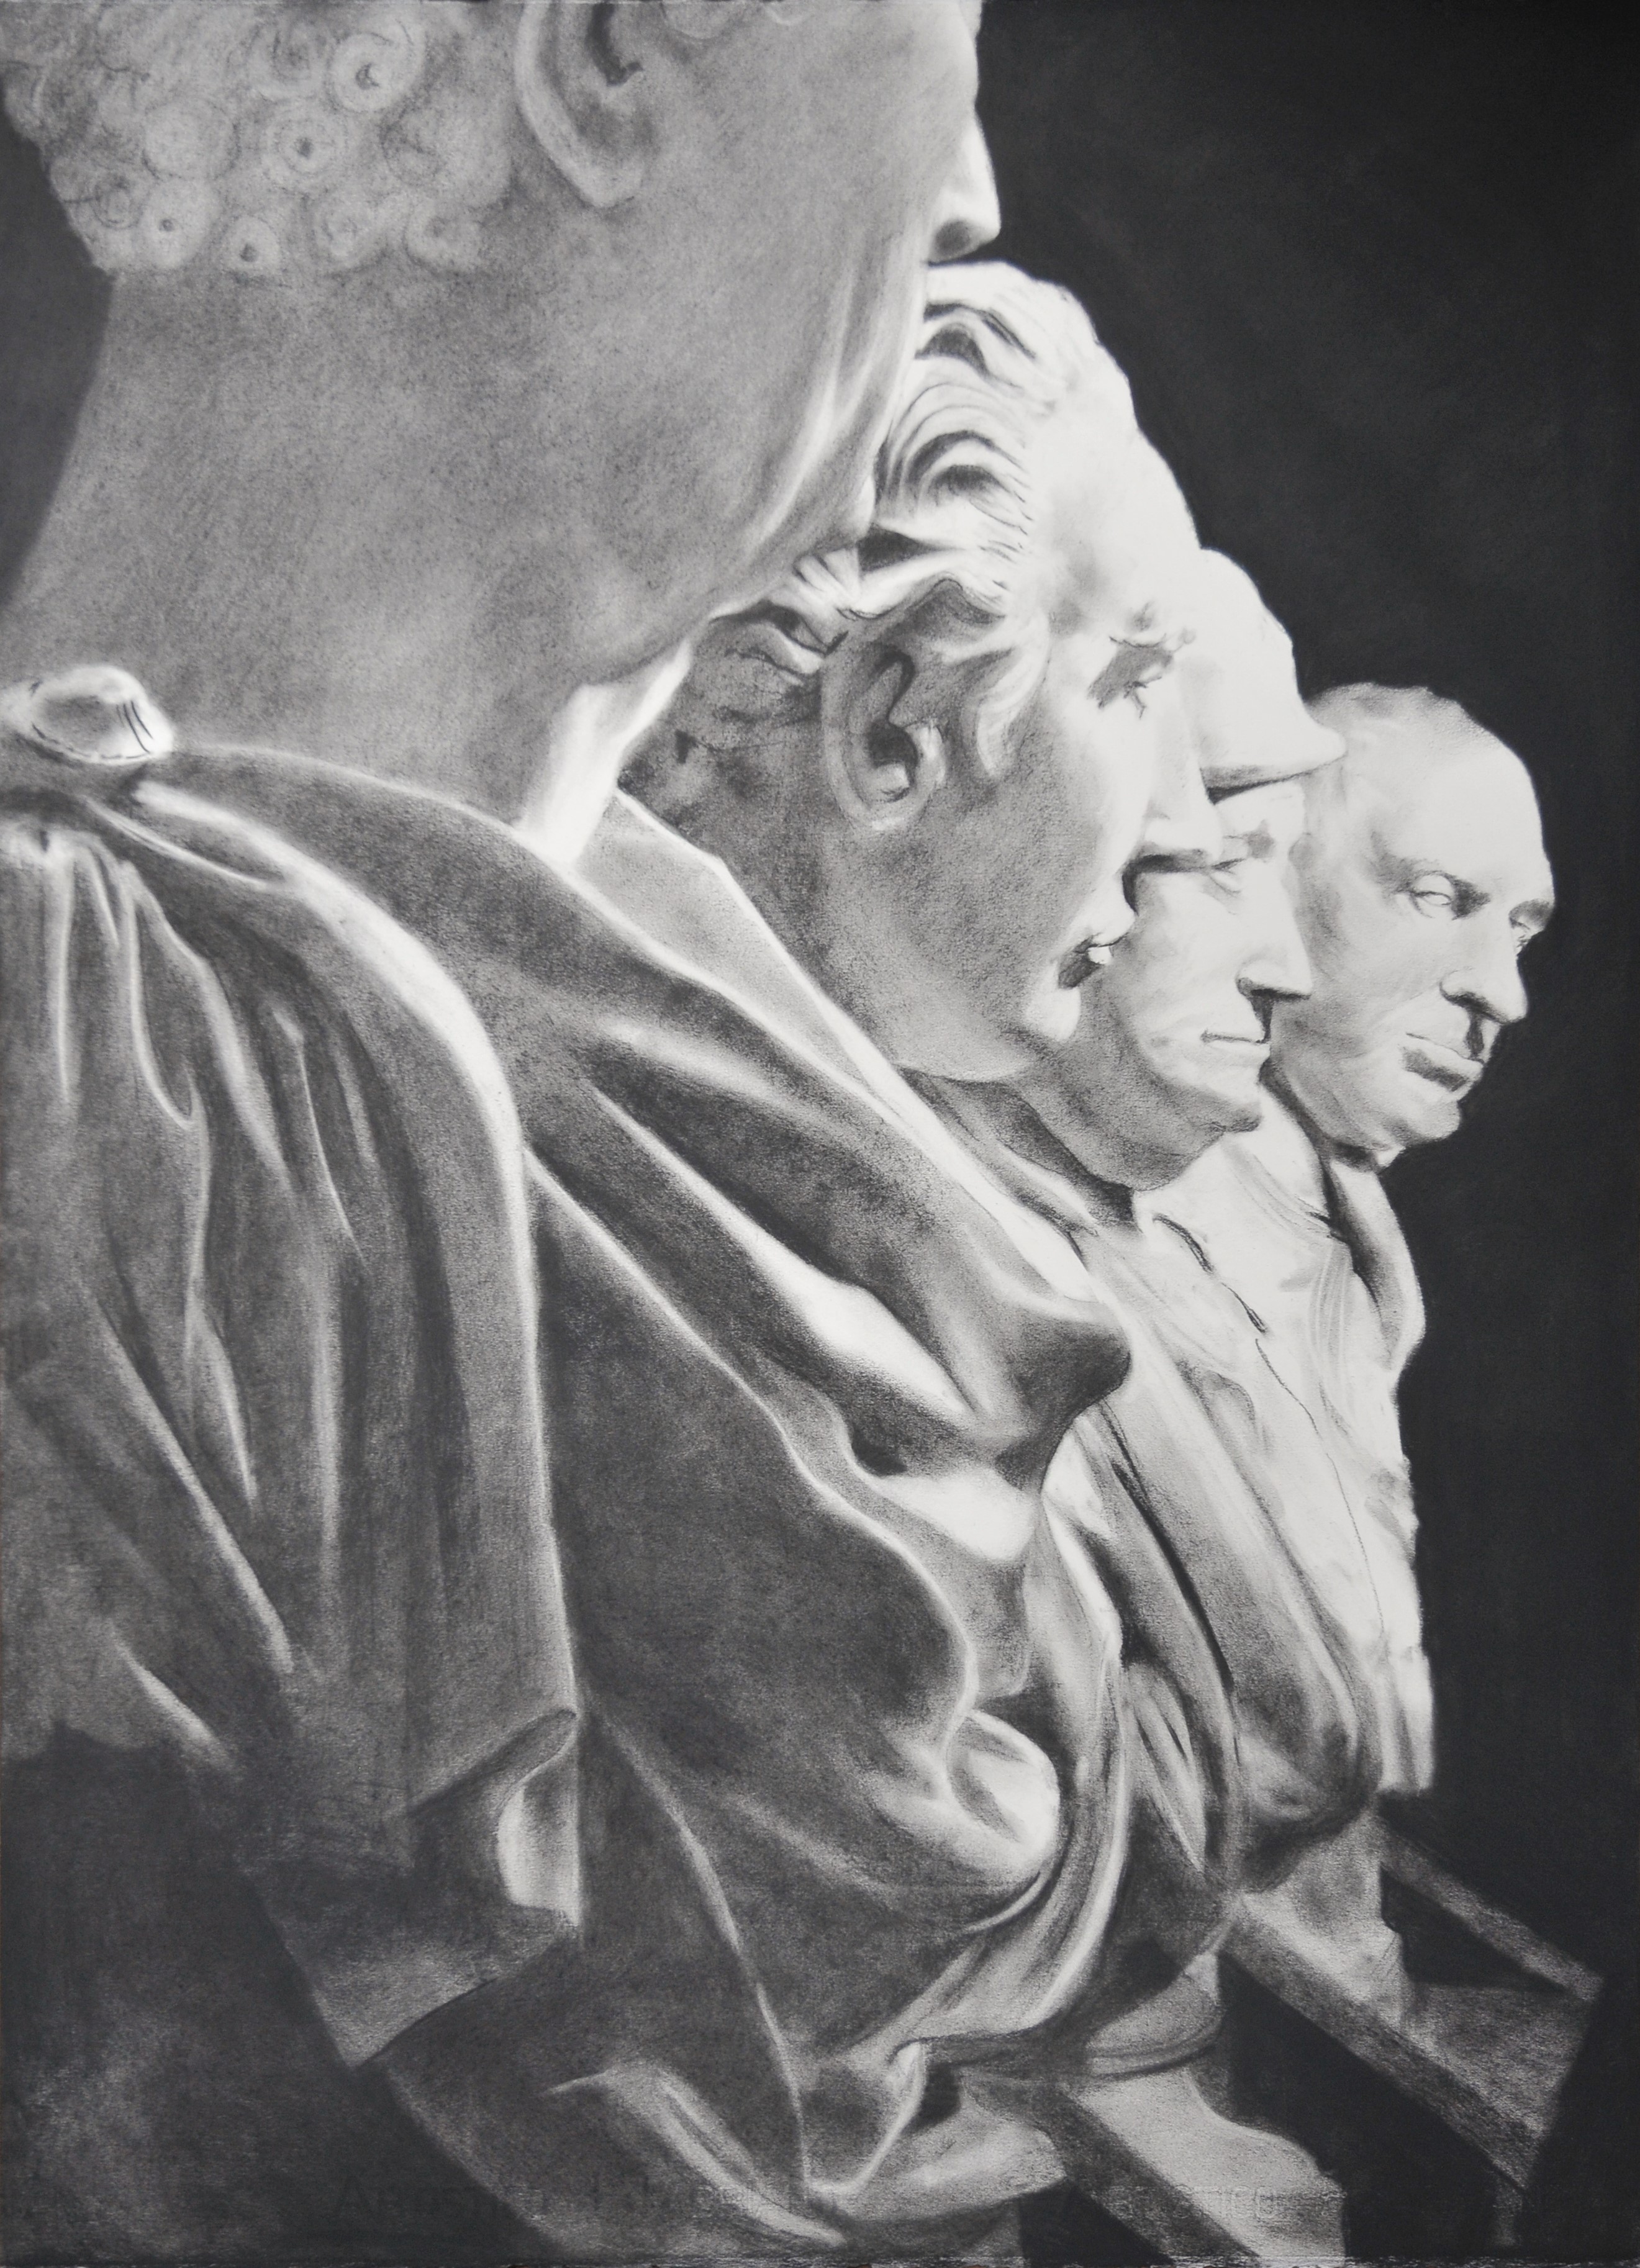 Charcoal drawing of statues at the V&A Museum